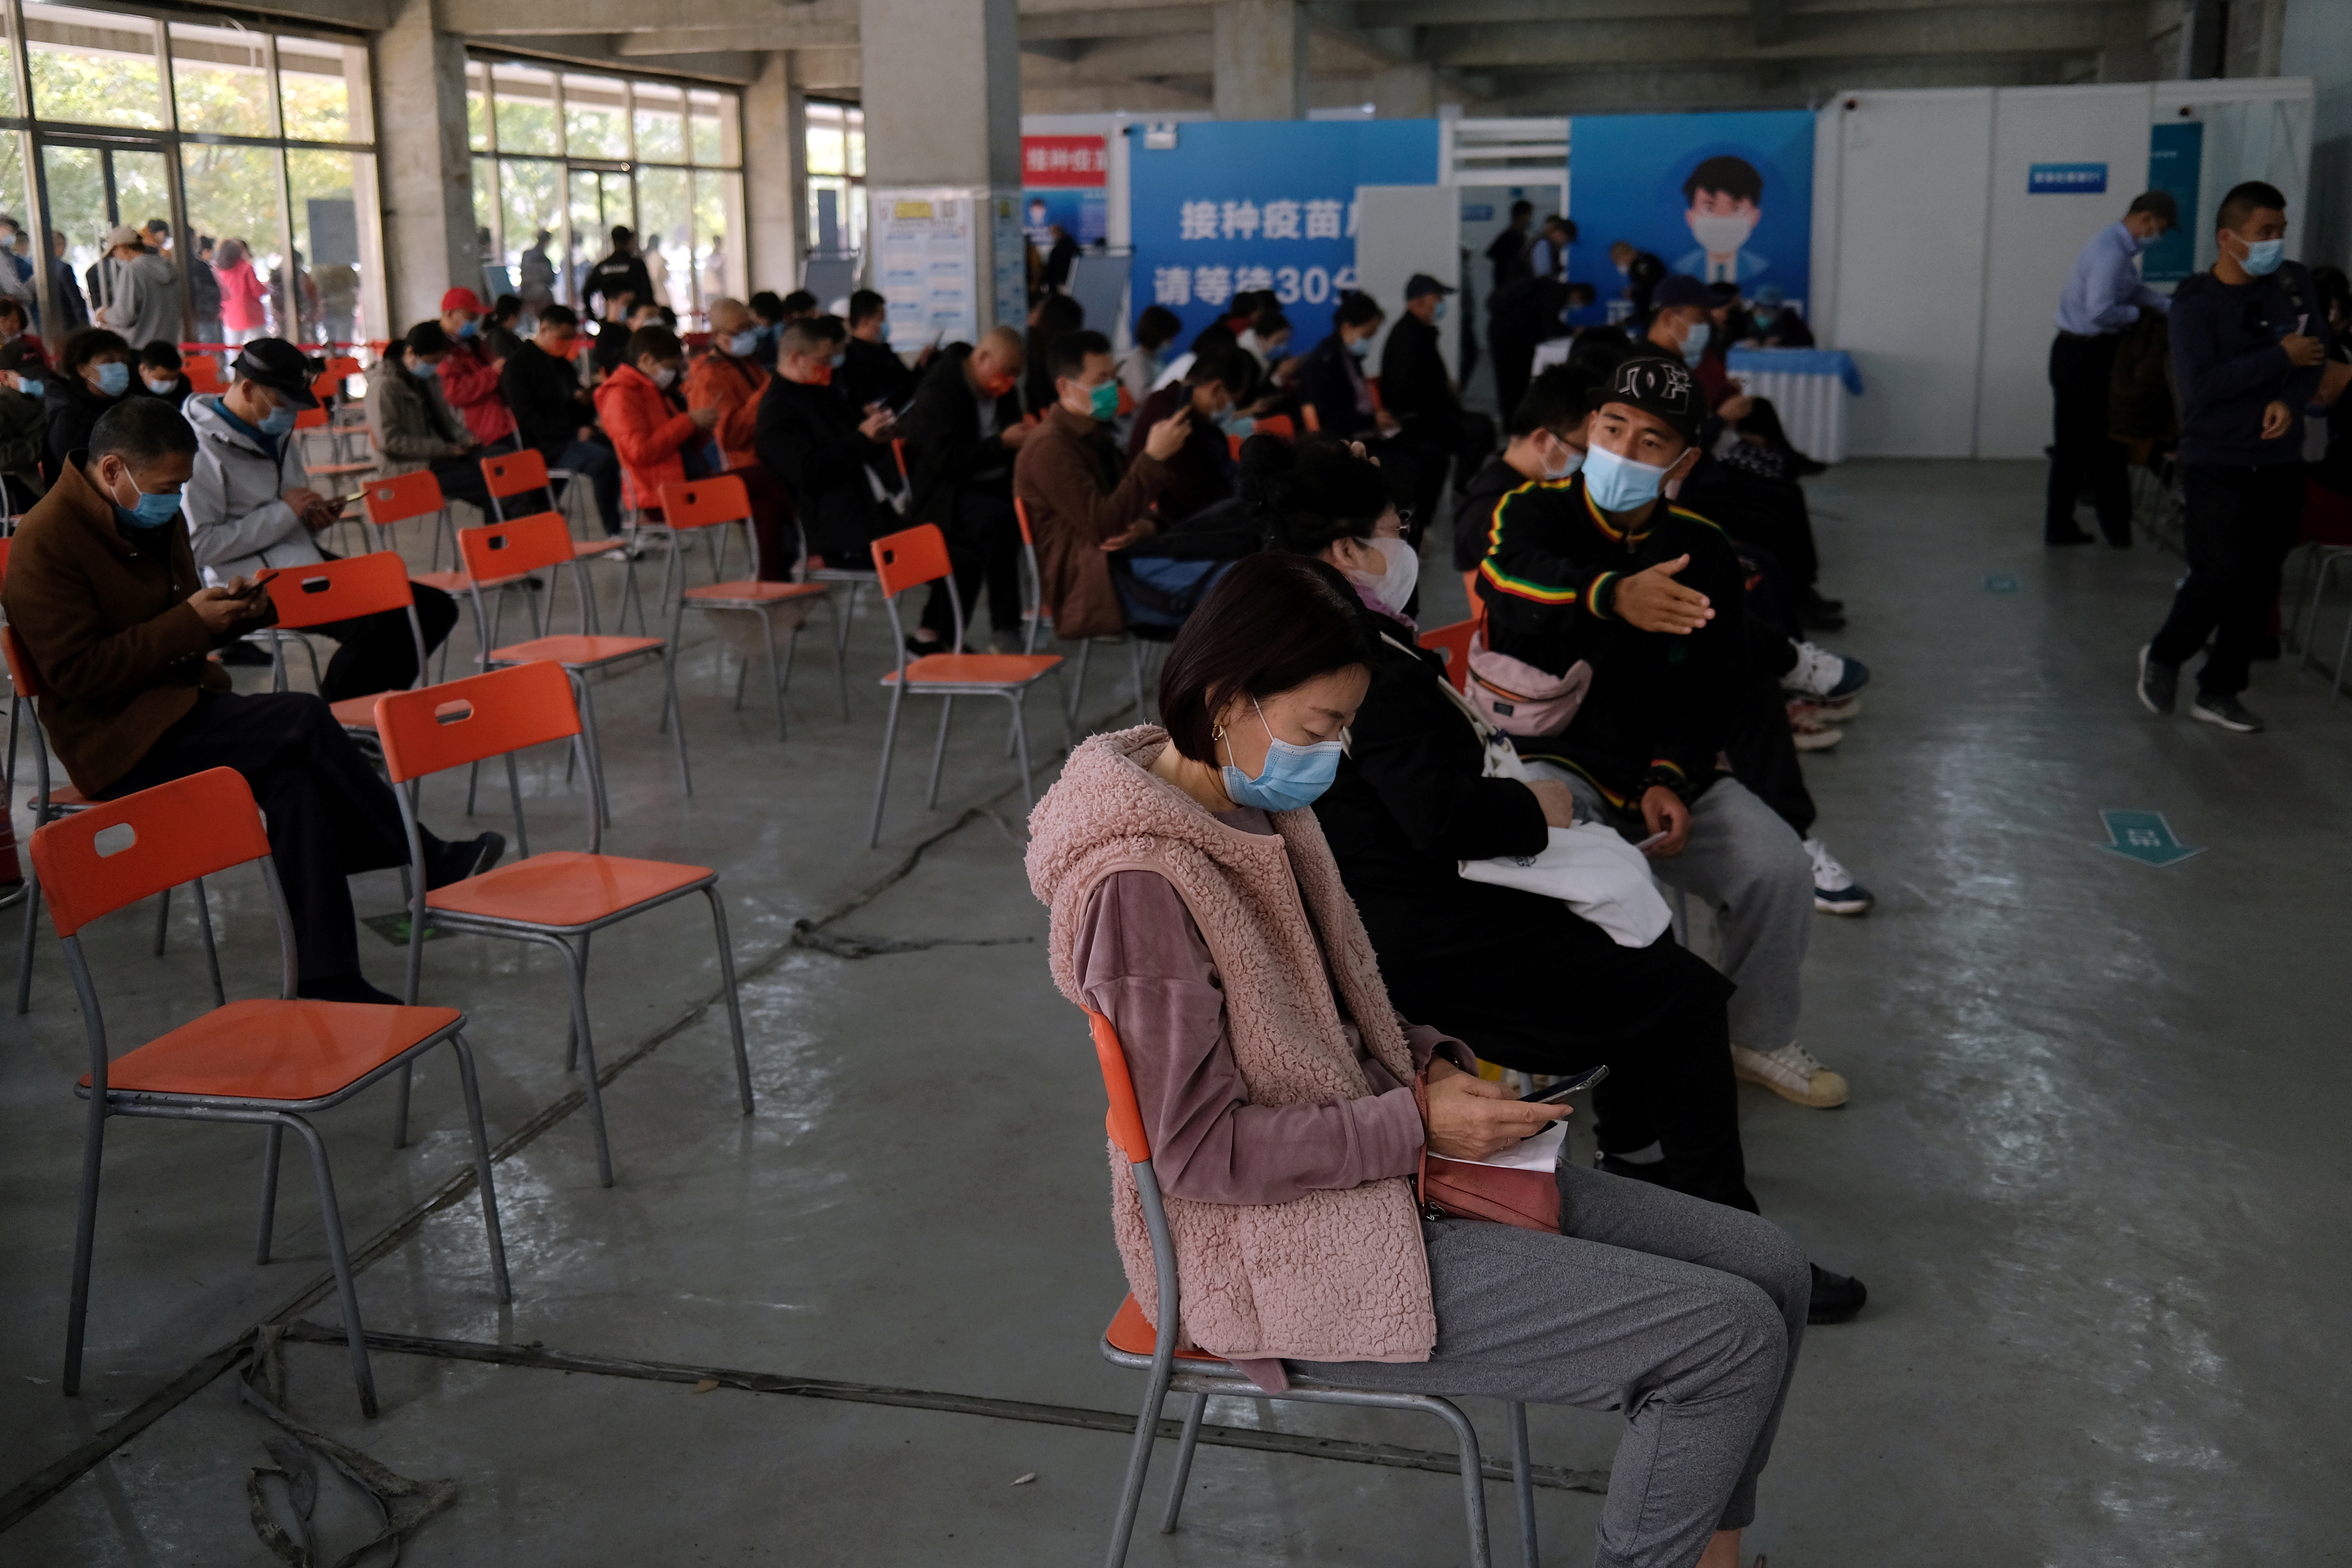 People wait at an observation area after receiving booster shots of COVID-19 vaccine at a vaccination site in Beijing